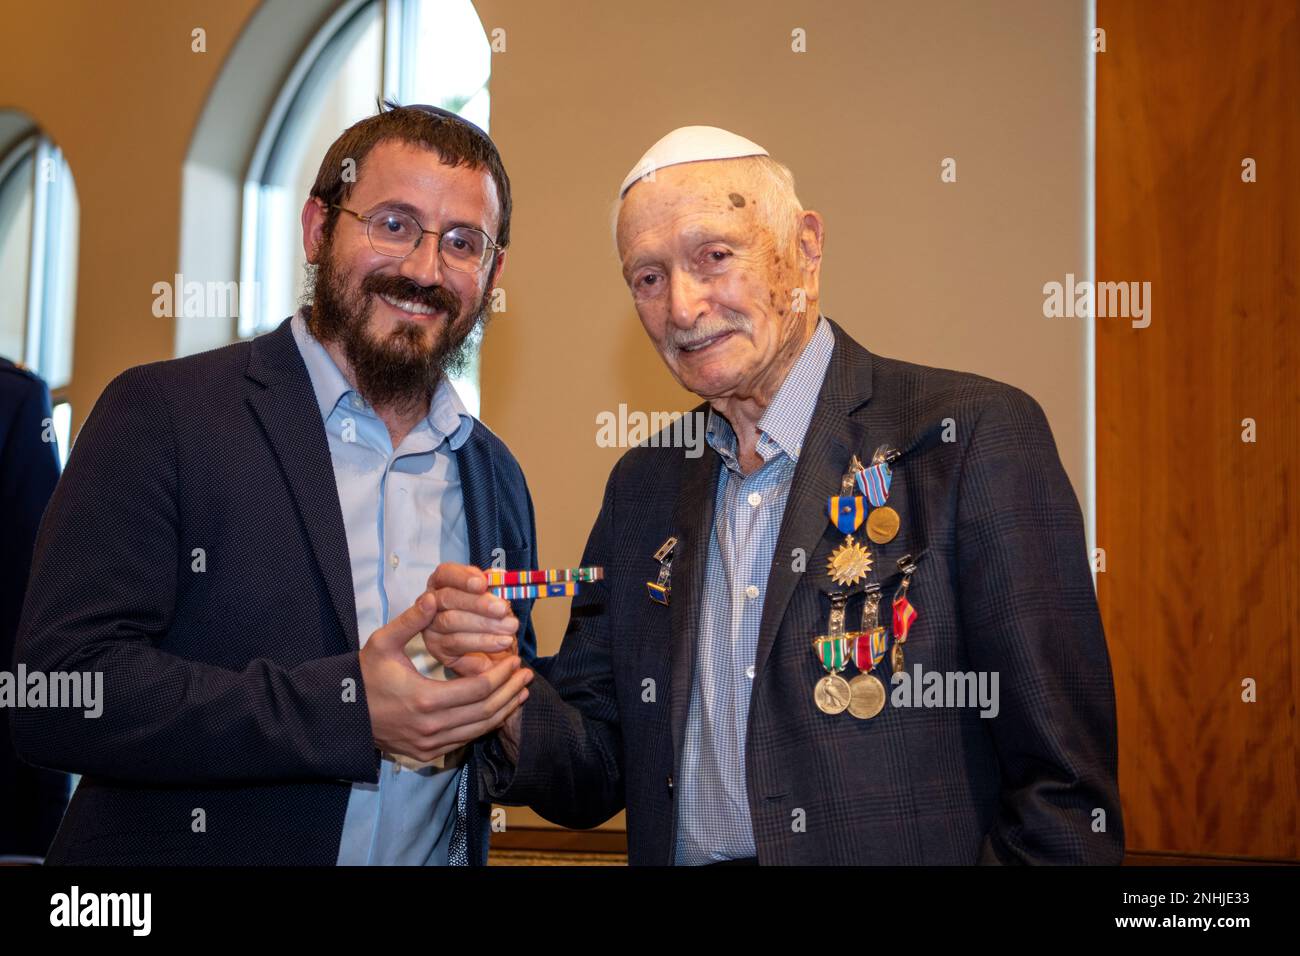 U.S. Army Air Corps 1st Lt. Gerald Teldon (right), retired, receives his ribbons from his grandson, Rabbi Moshe Teldon, for his honorable service as a pilot on July 29, 2022, at the Chabad Center for Jewish Life and Learning, San Antonio, Texas. Teldon, born in Bronx, N.Y., in 1924, joined the military in 1944. He completed 62 missions during WWII and the Korean War. Lt. Col. Andrew Stein, 502nd Operations Support Squadron commander, was the presiding officers. The awards presented to Teldon are as follows: the Air Medal; American Campaign Medal; European – African – Middle Eastern Campaign Me Stock Photo